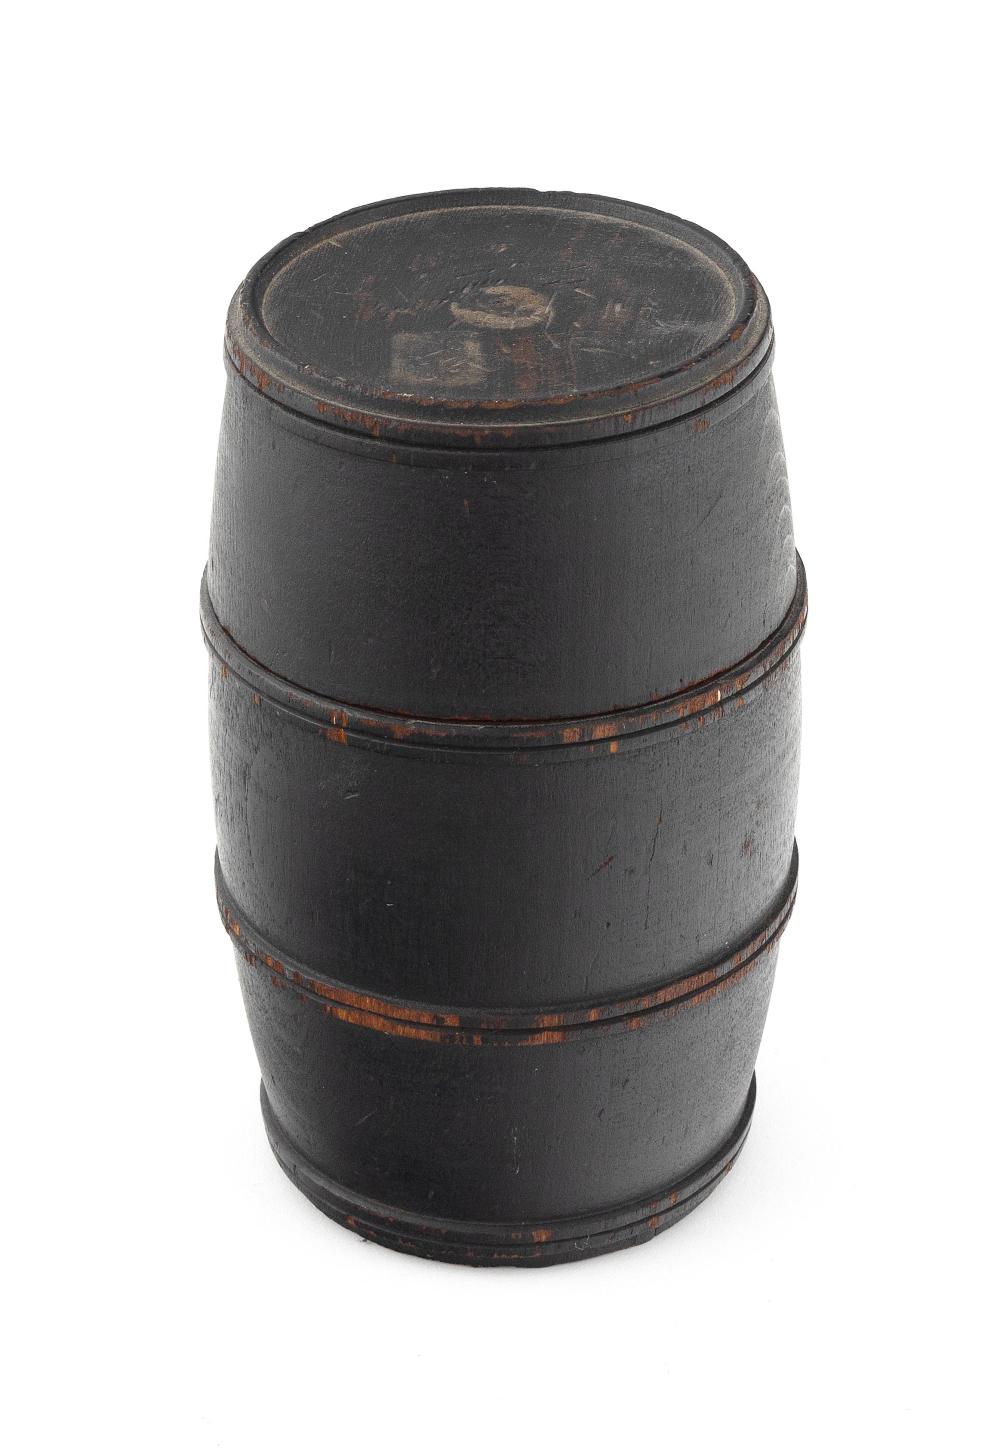 TURNED WOODEN BARREL FORM CANISTER 3b360b